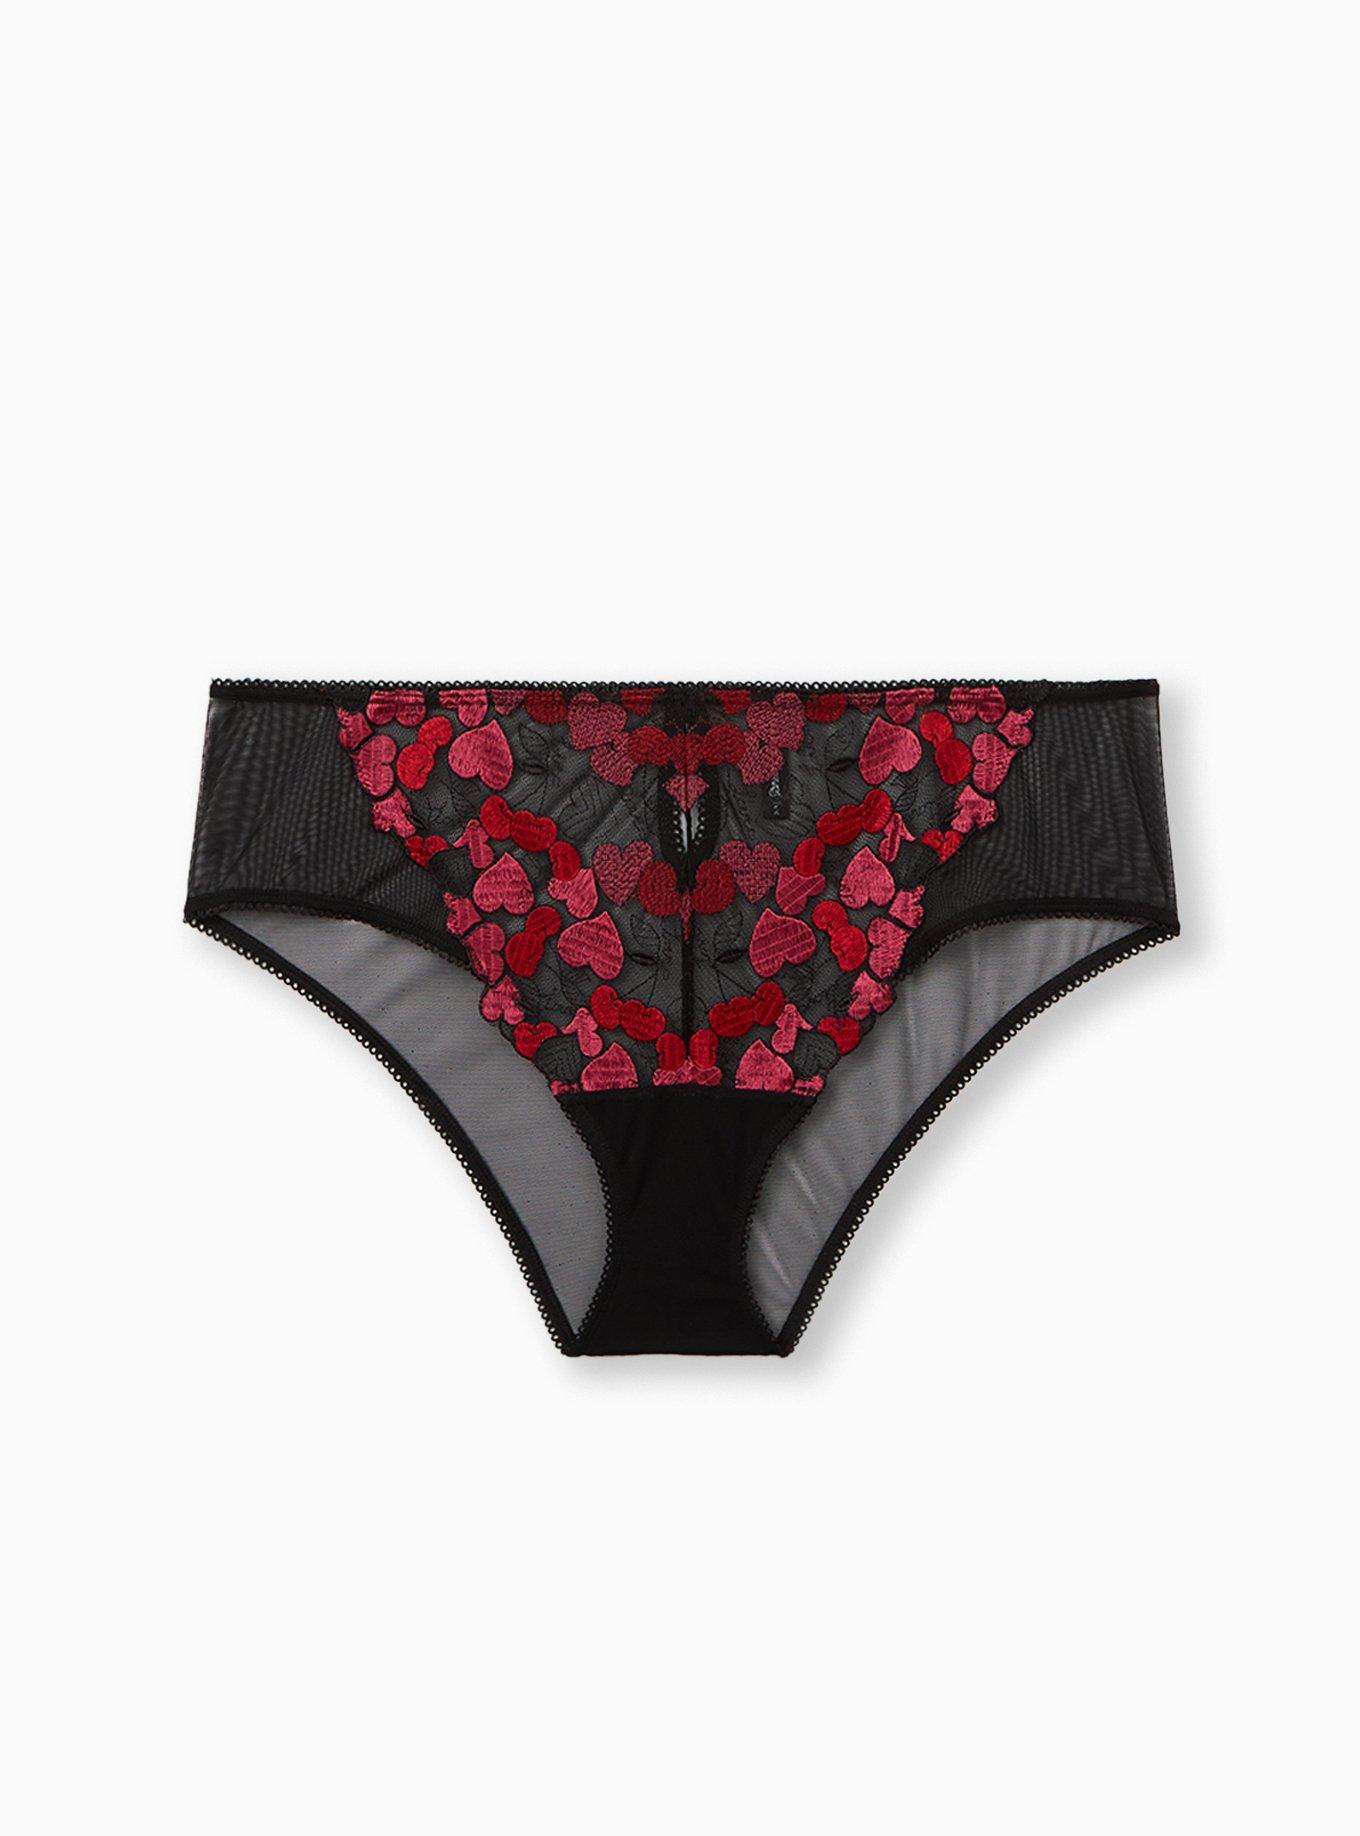 Underwear Women, Hipster Panties, Ultra Soft, Check Plaid Vintage Art Pink  White : : Clothing, Shoes & Accessories